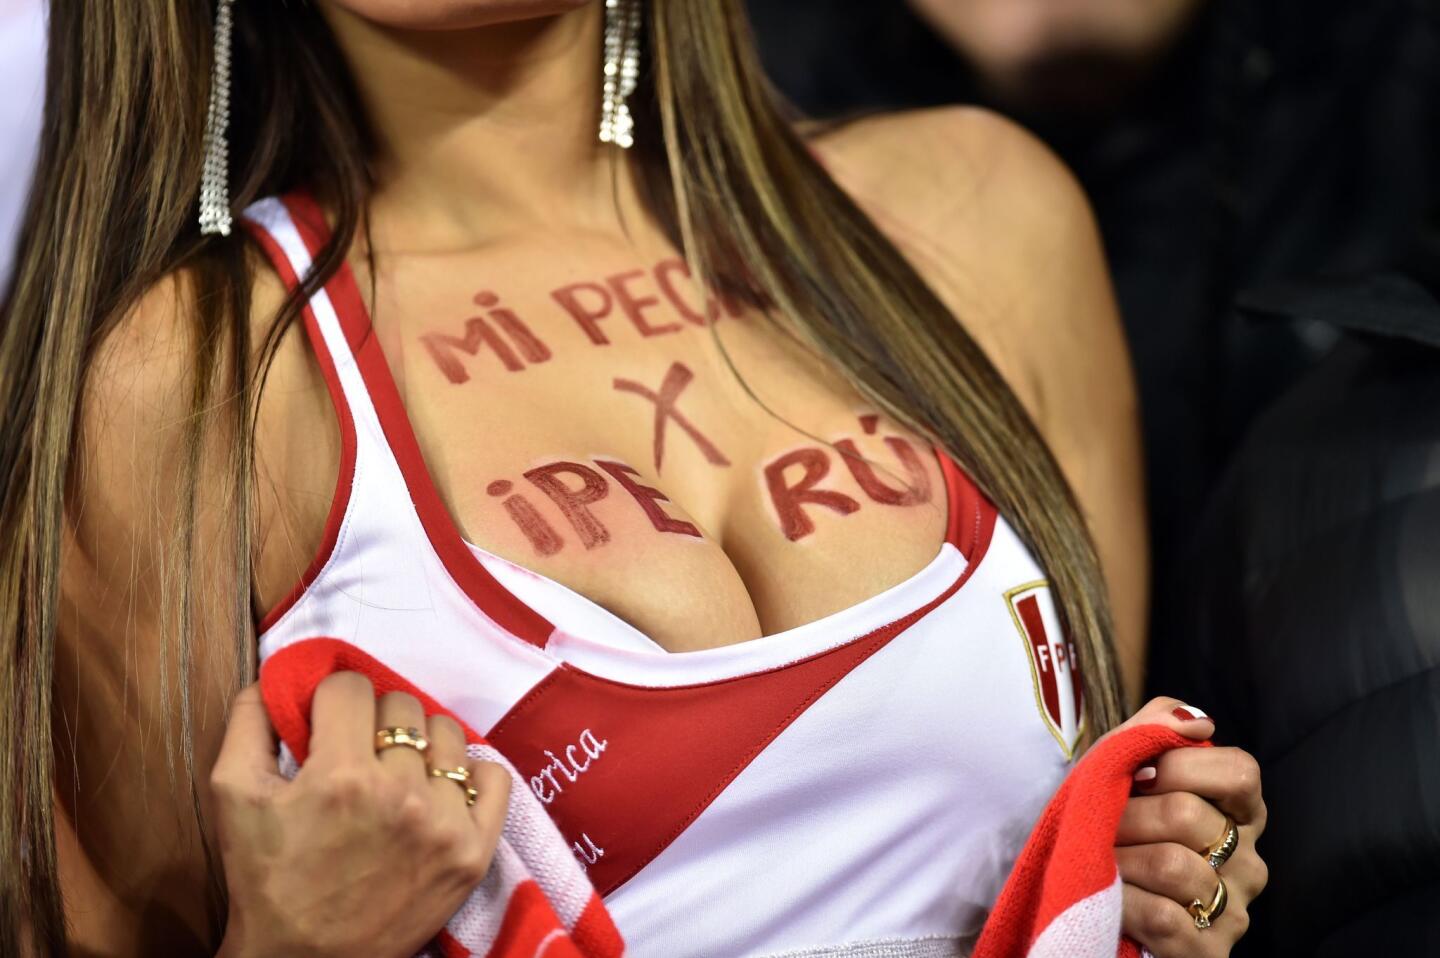 A supporter of Peru poses for pictures as she waits for the start of the 2015 Copa America football championship quarter-final match between Peru and Bolivia, in Temuco, Chile, on June 25, 2015. AFP PHOTO / YURI CORTEZYURI CORTEZ/AFP/Getty Images ** OUTS - ELSENT, FPG - OUTS * NM, PH, VA if sourced by CT, LA or MoD **